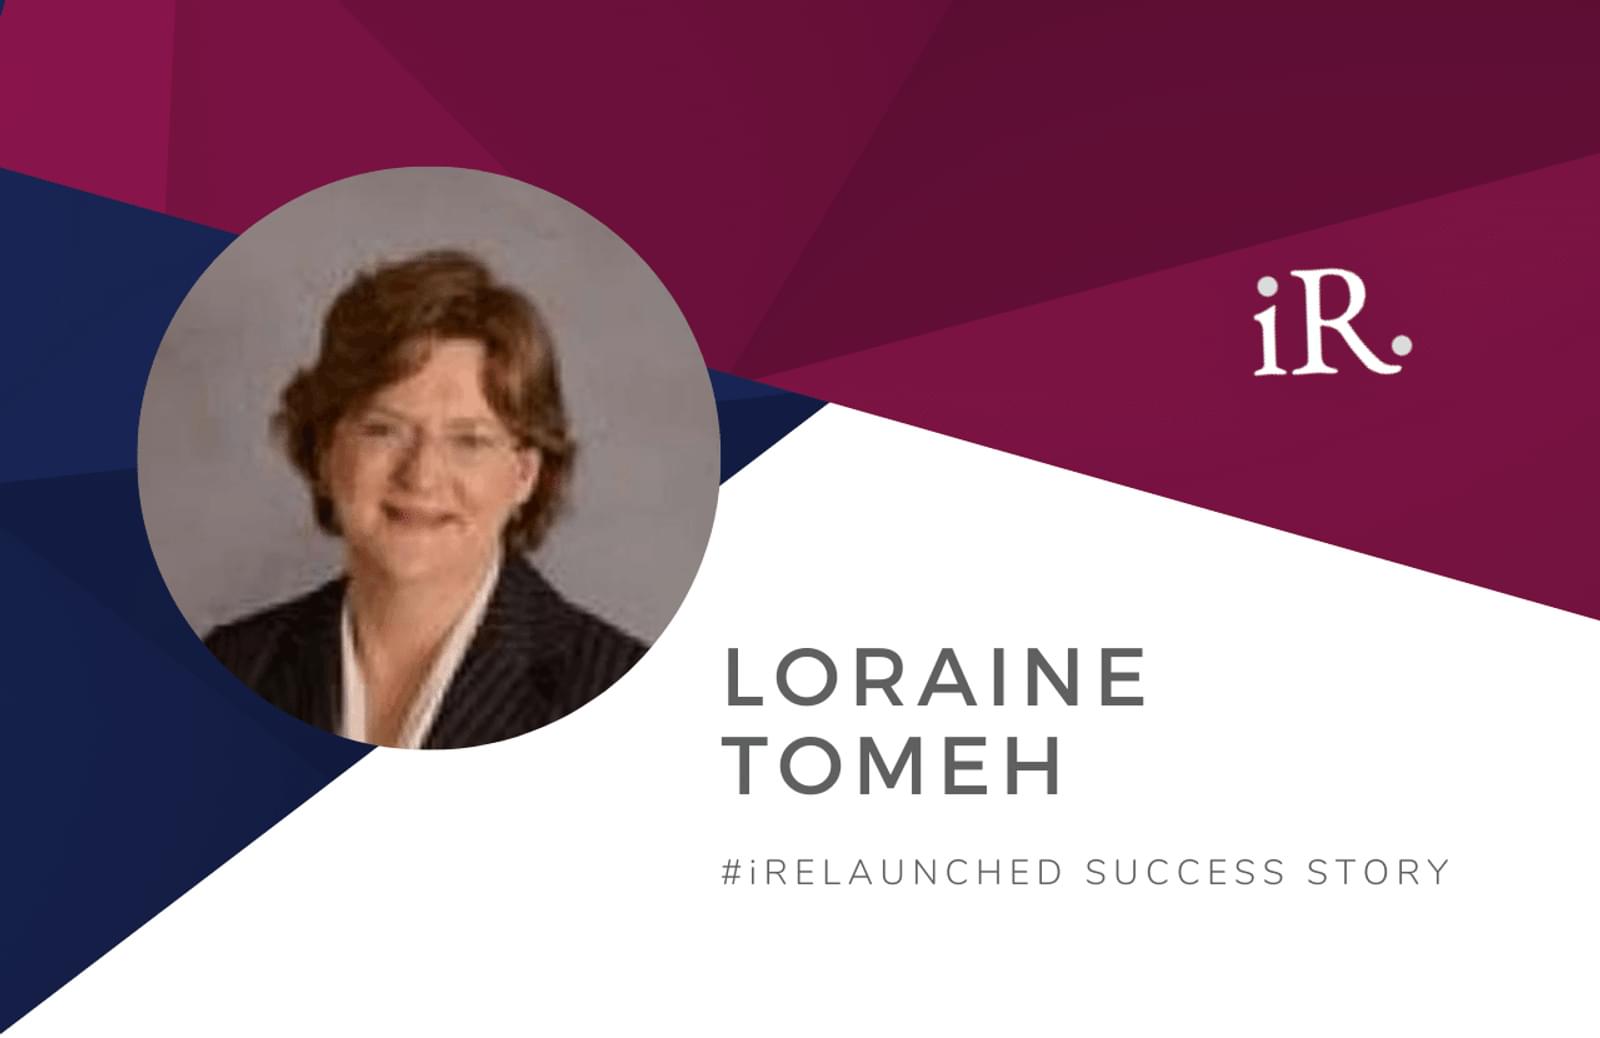 Loraine Tomeh's headshot and the text #iRelaunched Success Story along with the iRelaunch logo.  A navy and maroon geometric textured background intersect behind Loraine's headshot.